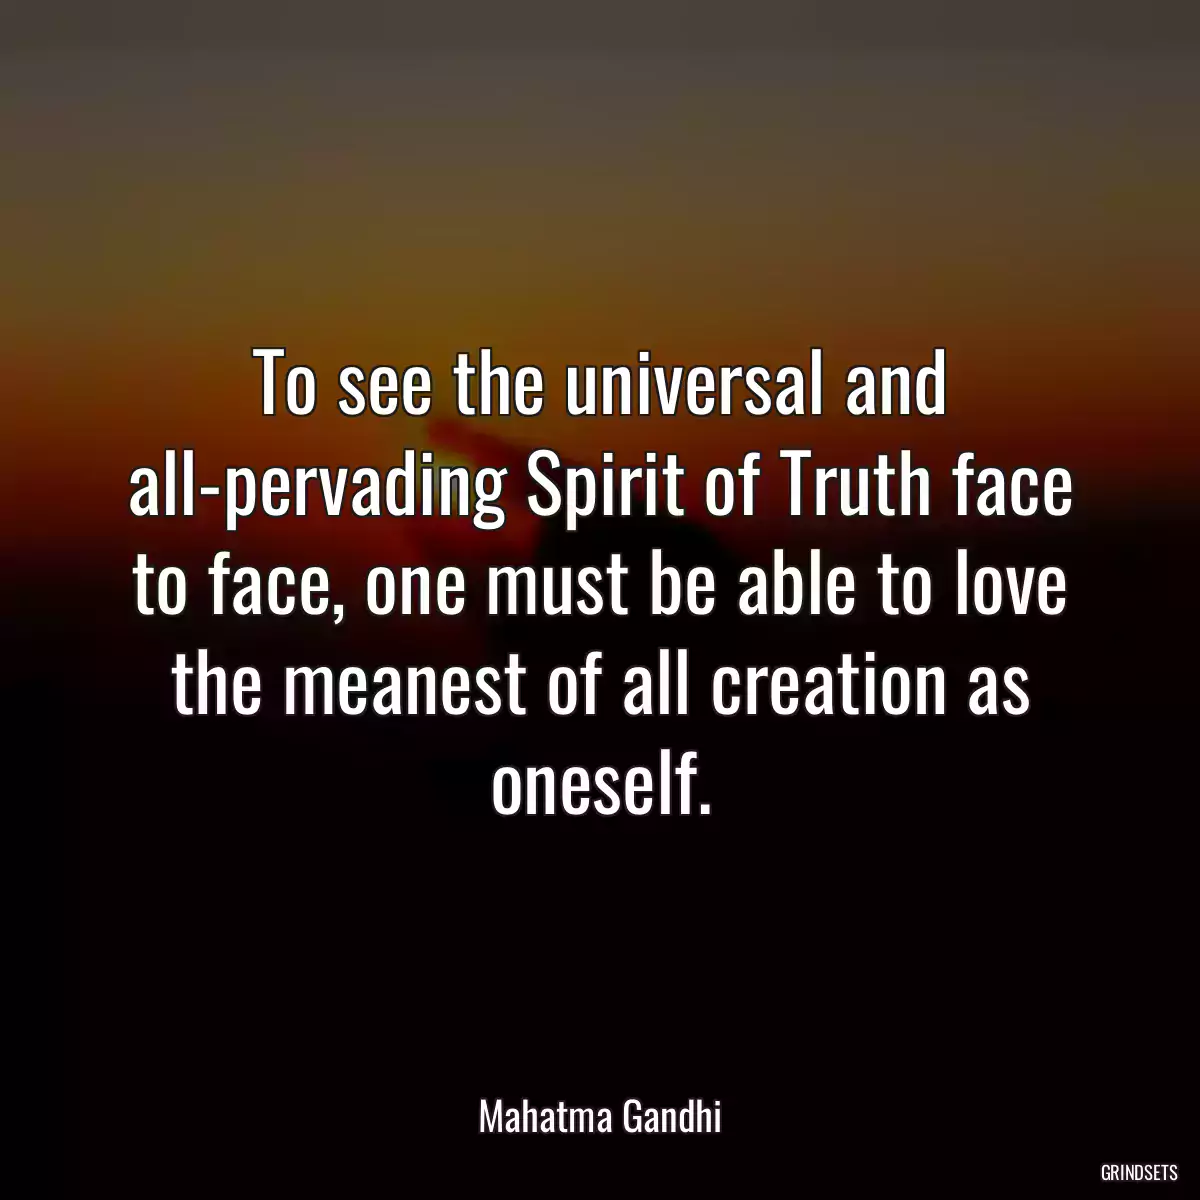 To see the universal and all-pervading Spirit of Truth face to face, one must be able to love the meanest of all creation as oneself.